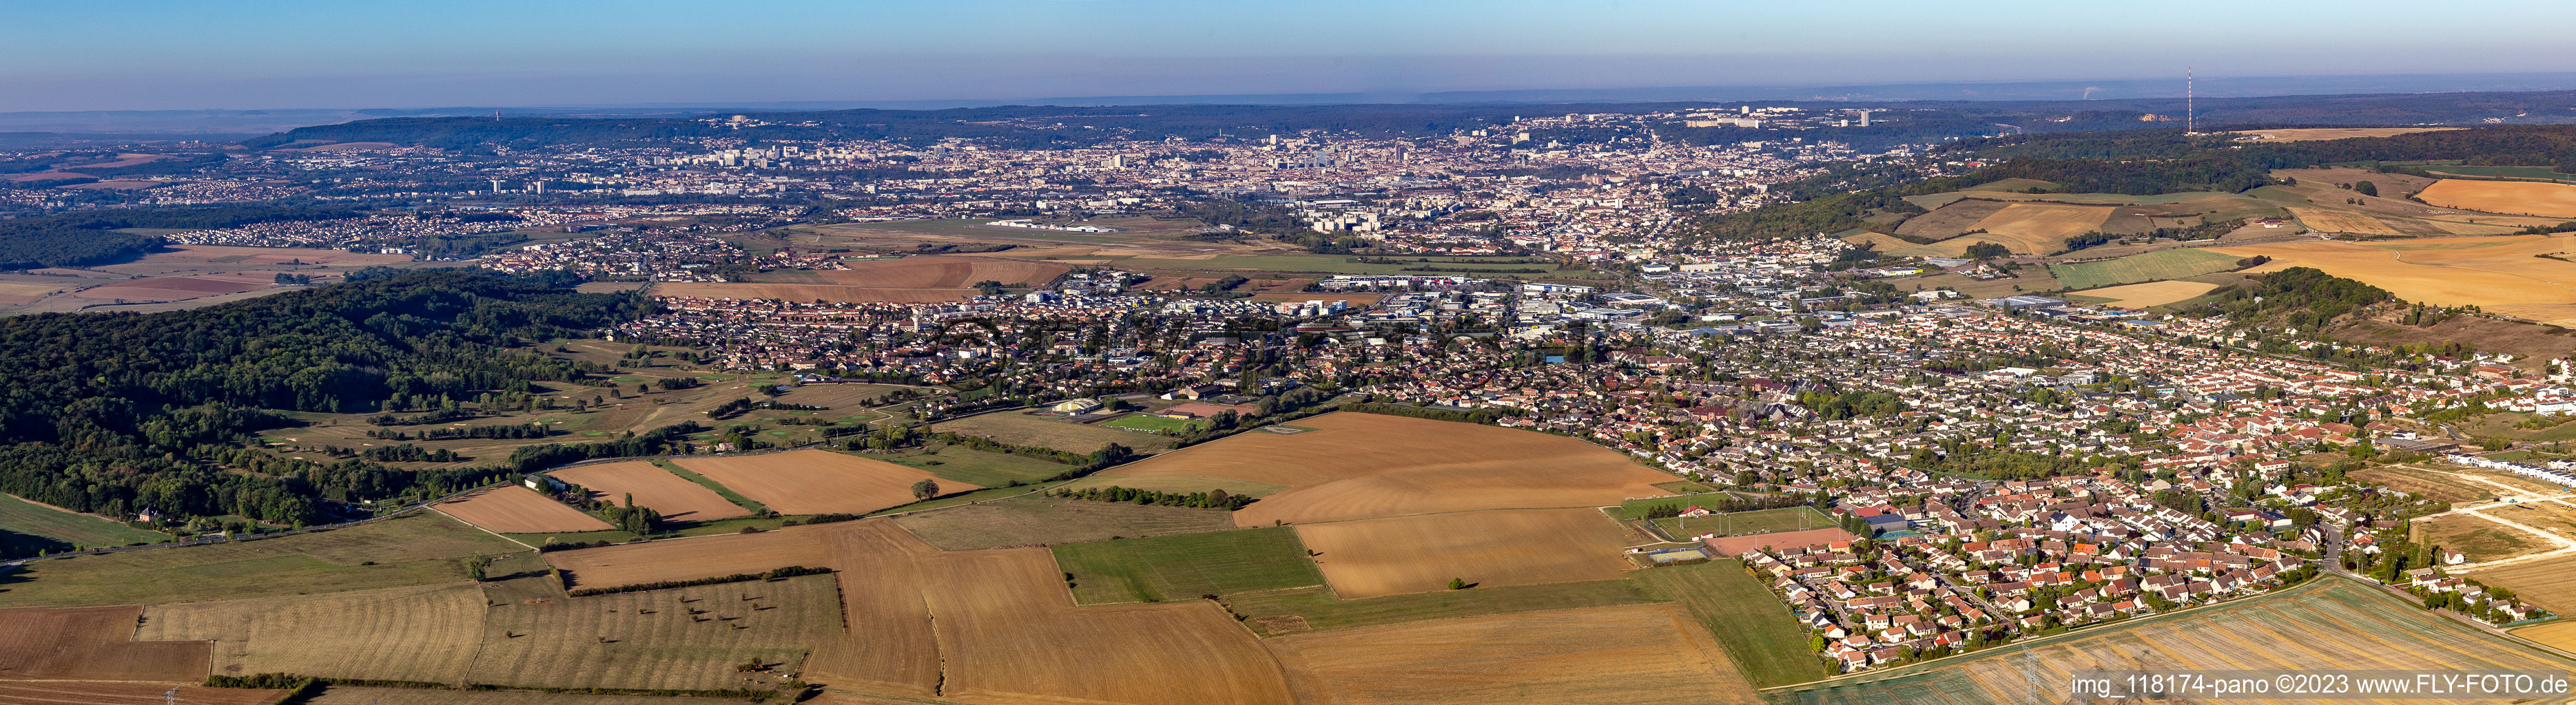 Aerial photograpy of Panoramic perspective of the city area with outside districts and inner city area in Nancy in Grand Est, France